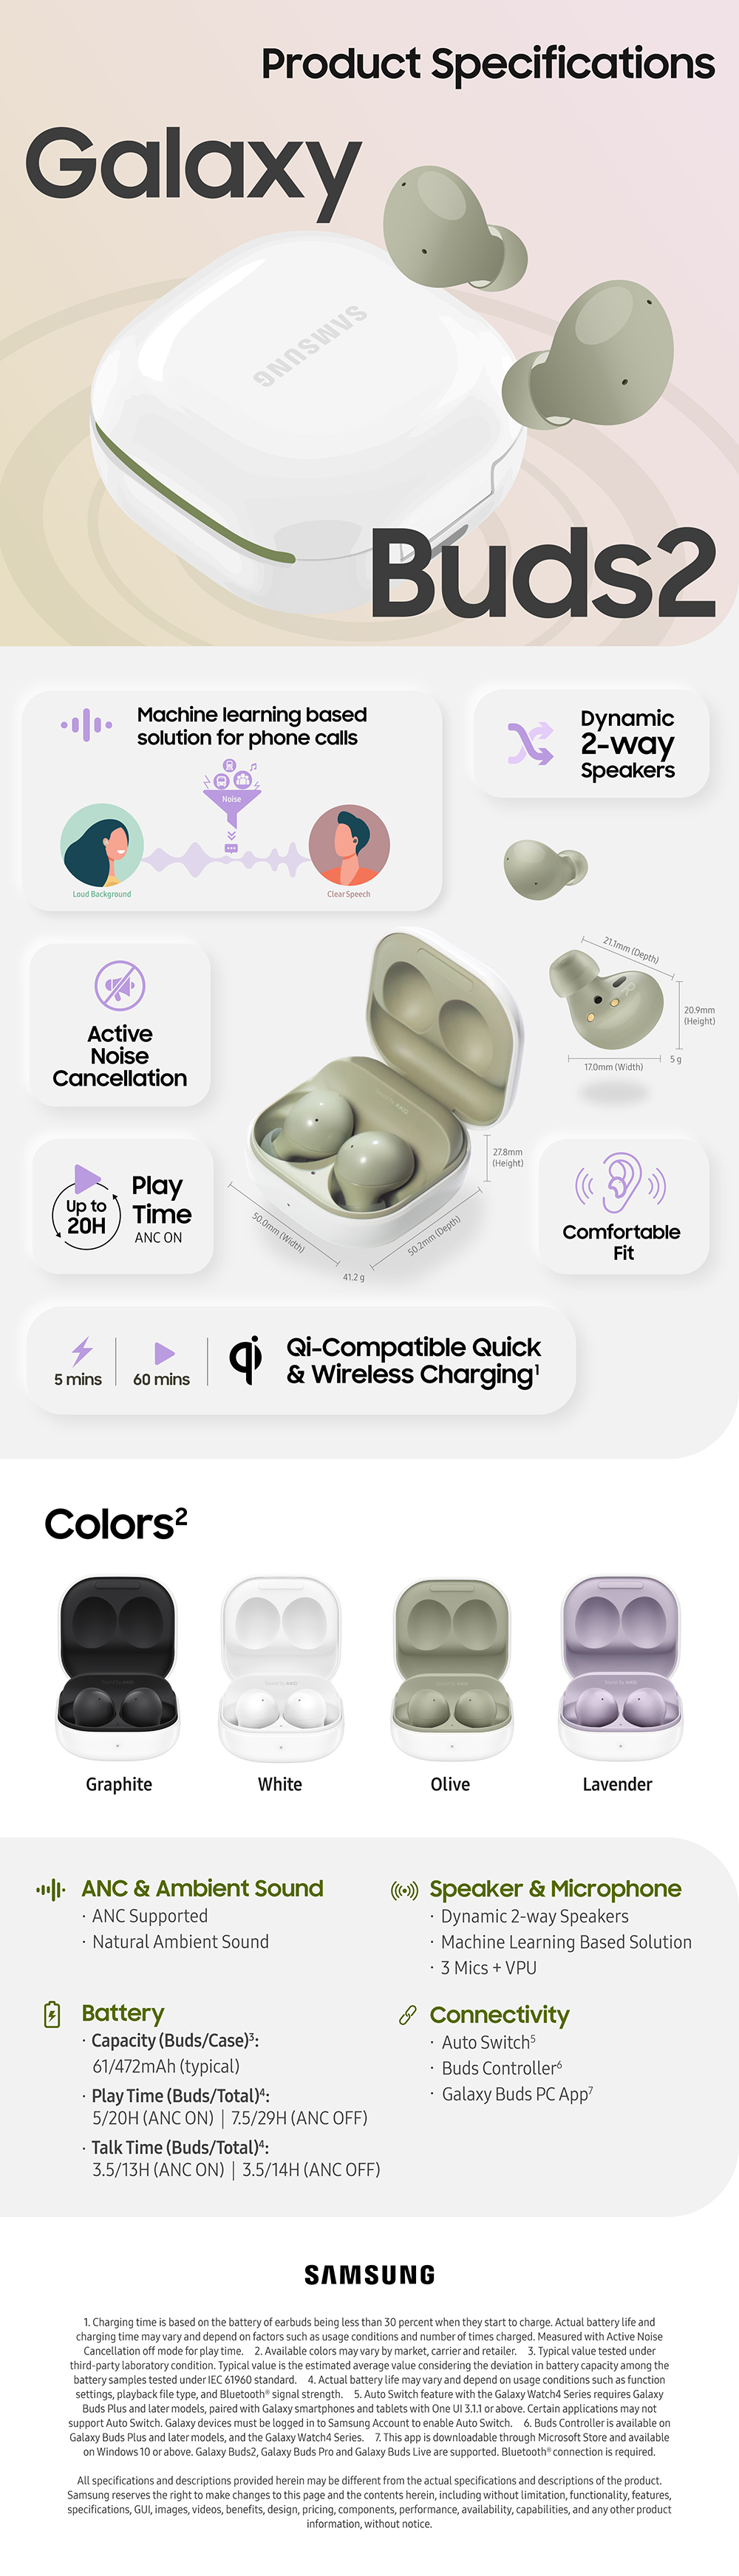 Galaxy_Buds2_product_specifications.jpg